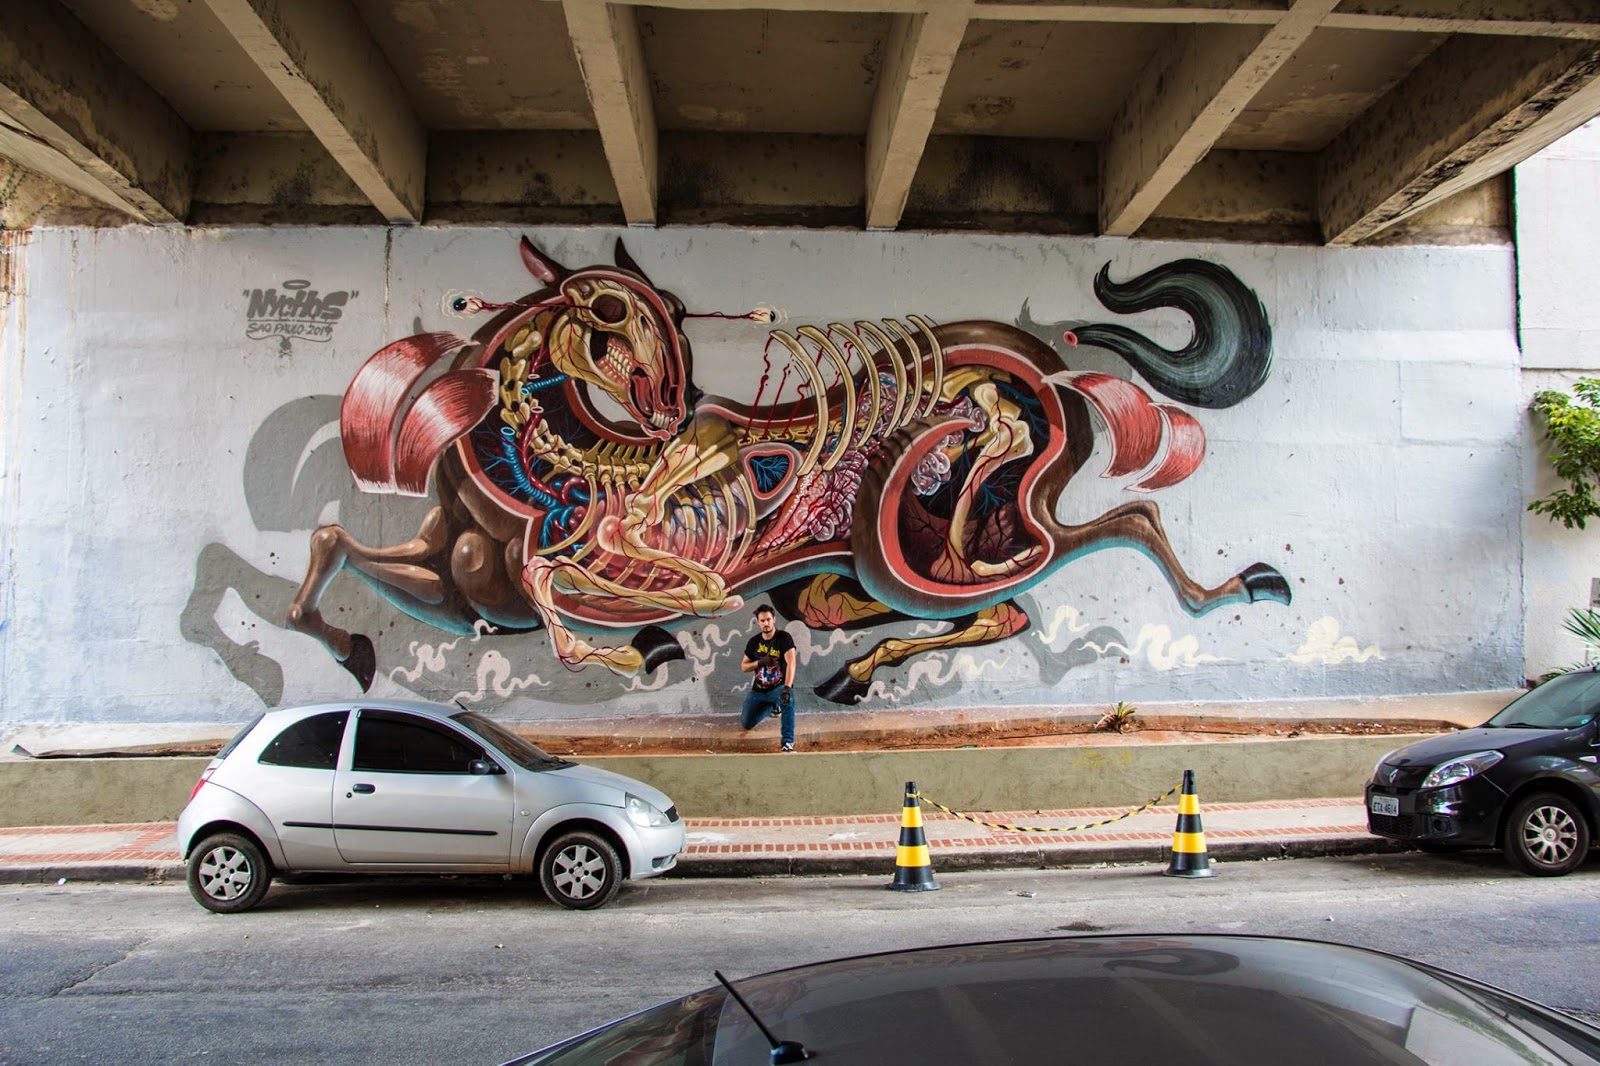 Last seen in Berlin, Germany last month for Urban Spree (covered), Nychos is now in South America where he just finished another signature piece somewhere on the streets of Sao Paulo in Brazil.